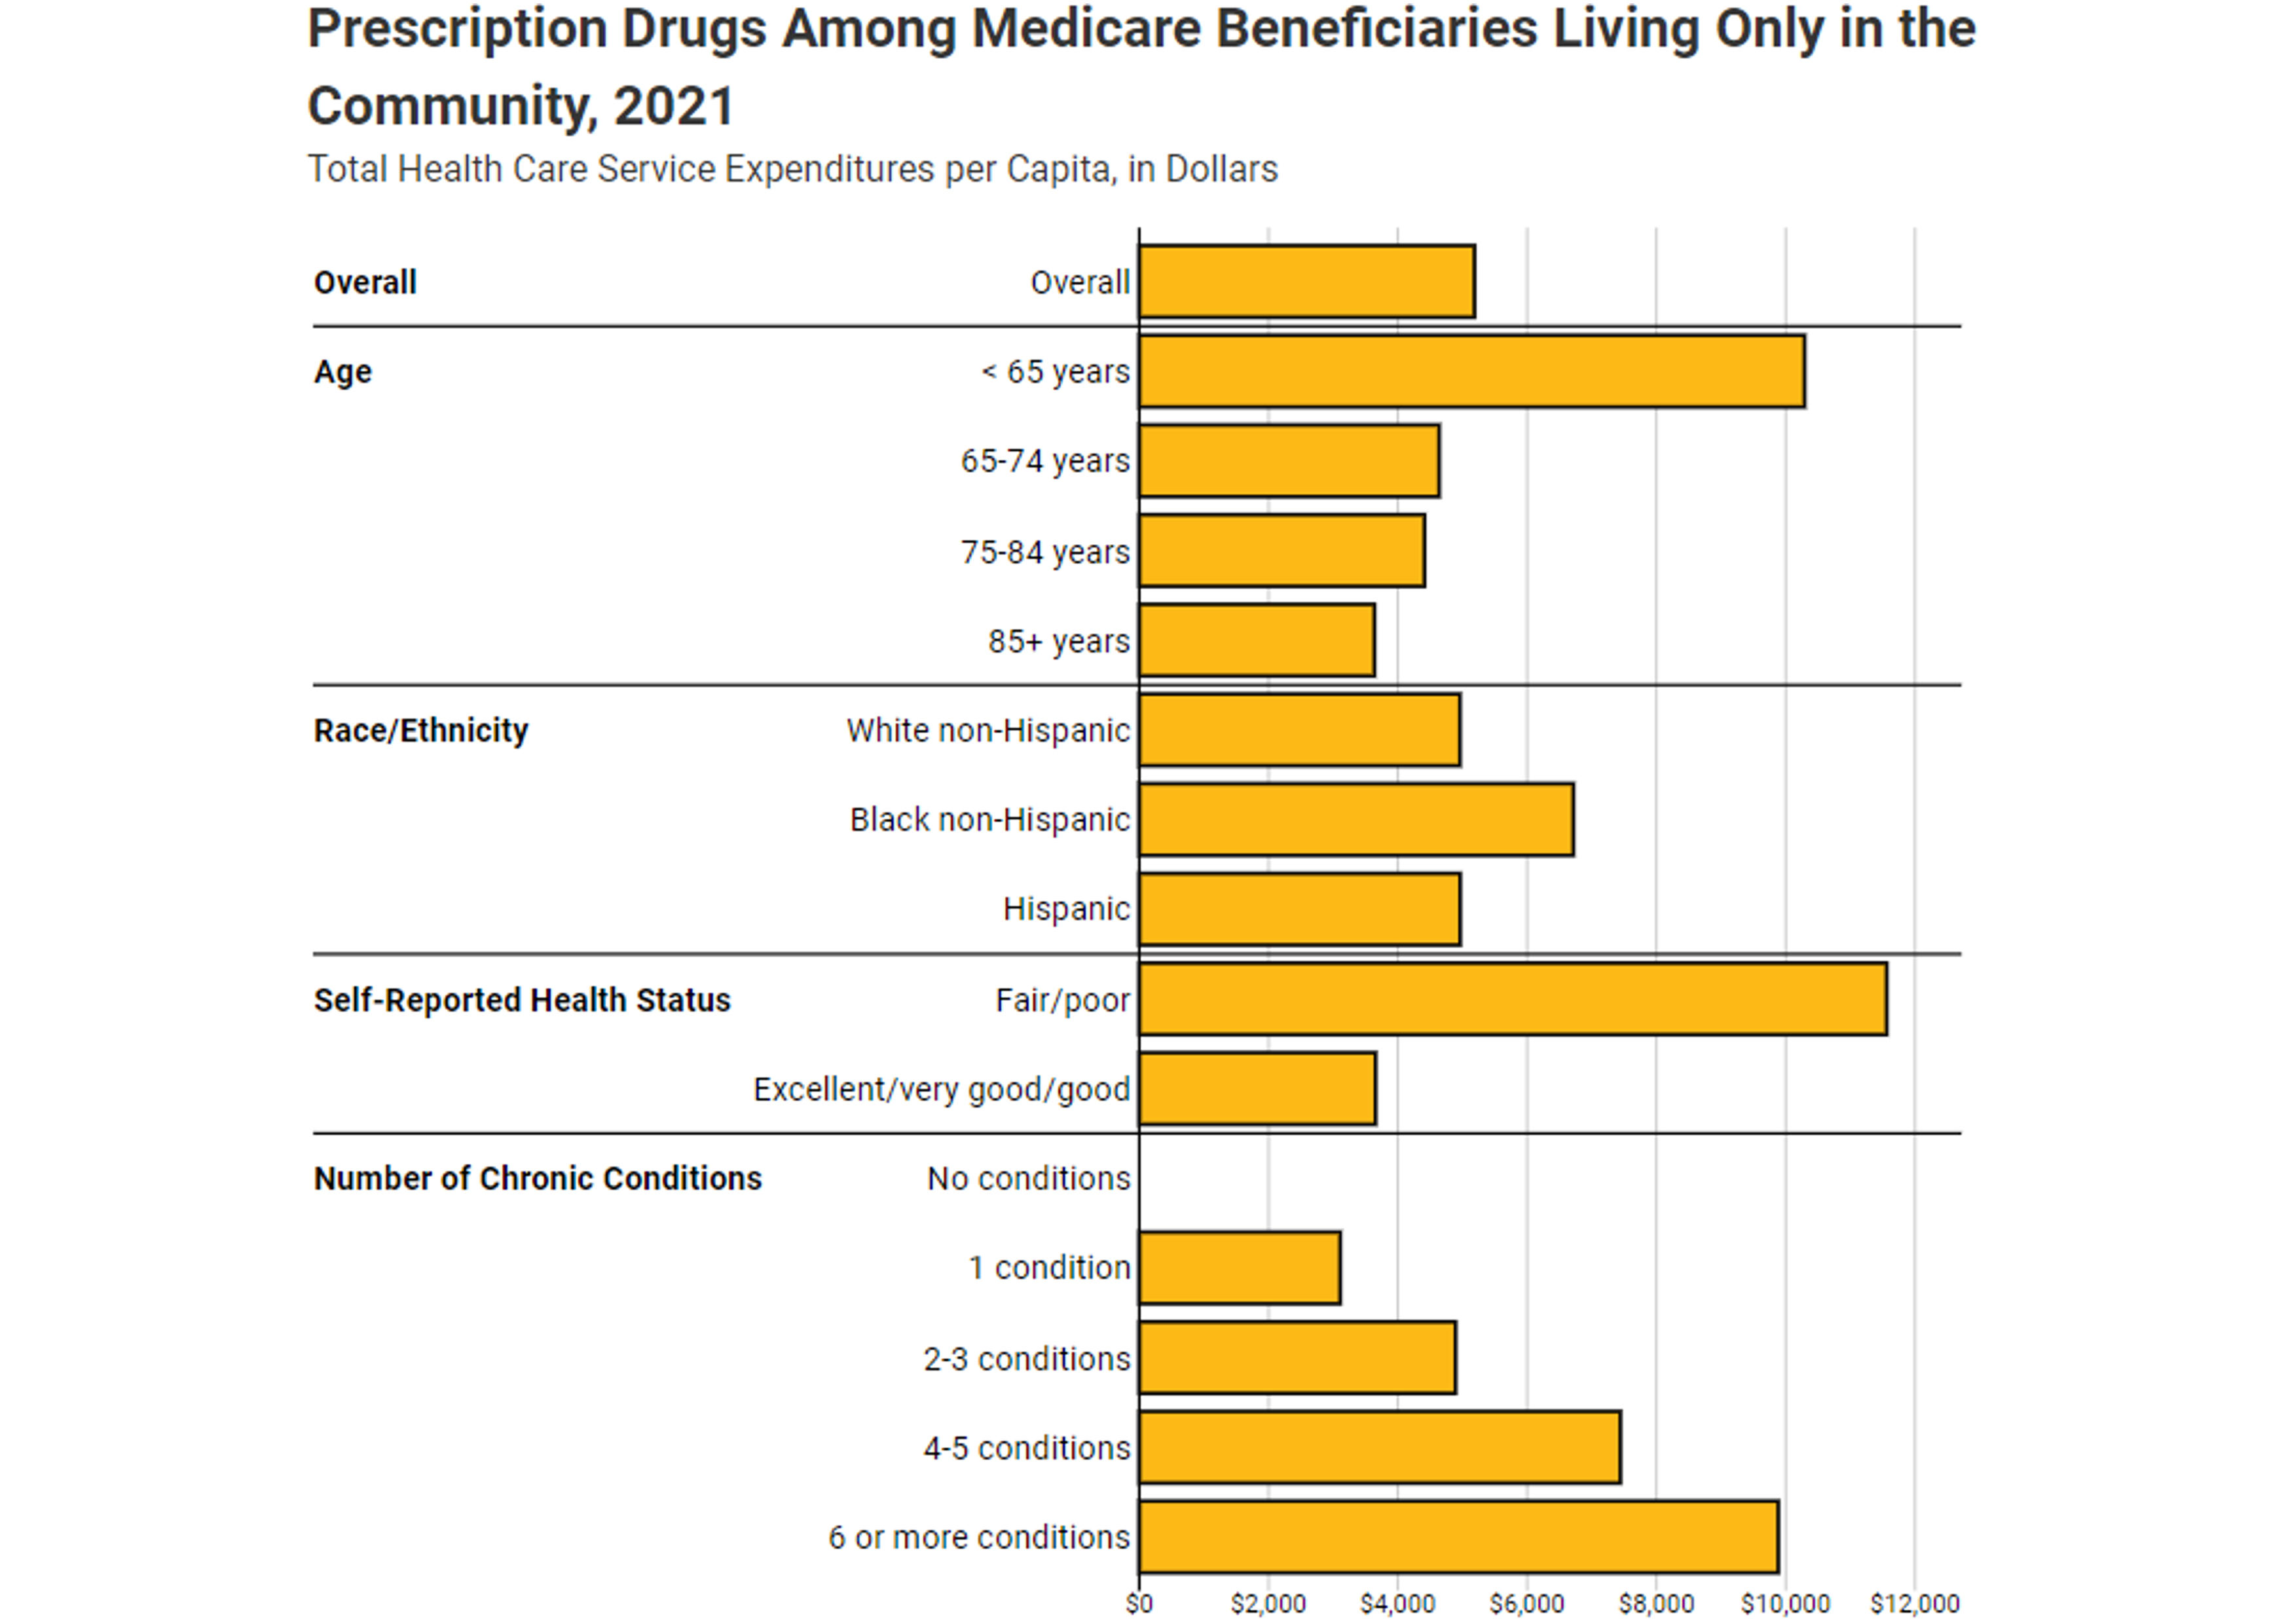 This image shows an example of a chart from the fourth domain, Health Care Use and Expenditures. The example shows total health care service expenditures per capita on prescription drugs among Medicare beneficiaries living only in the community overall and by age, race/ethnicity, self-reported health status, and number of chronic conditions in 2020.